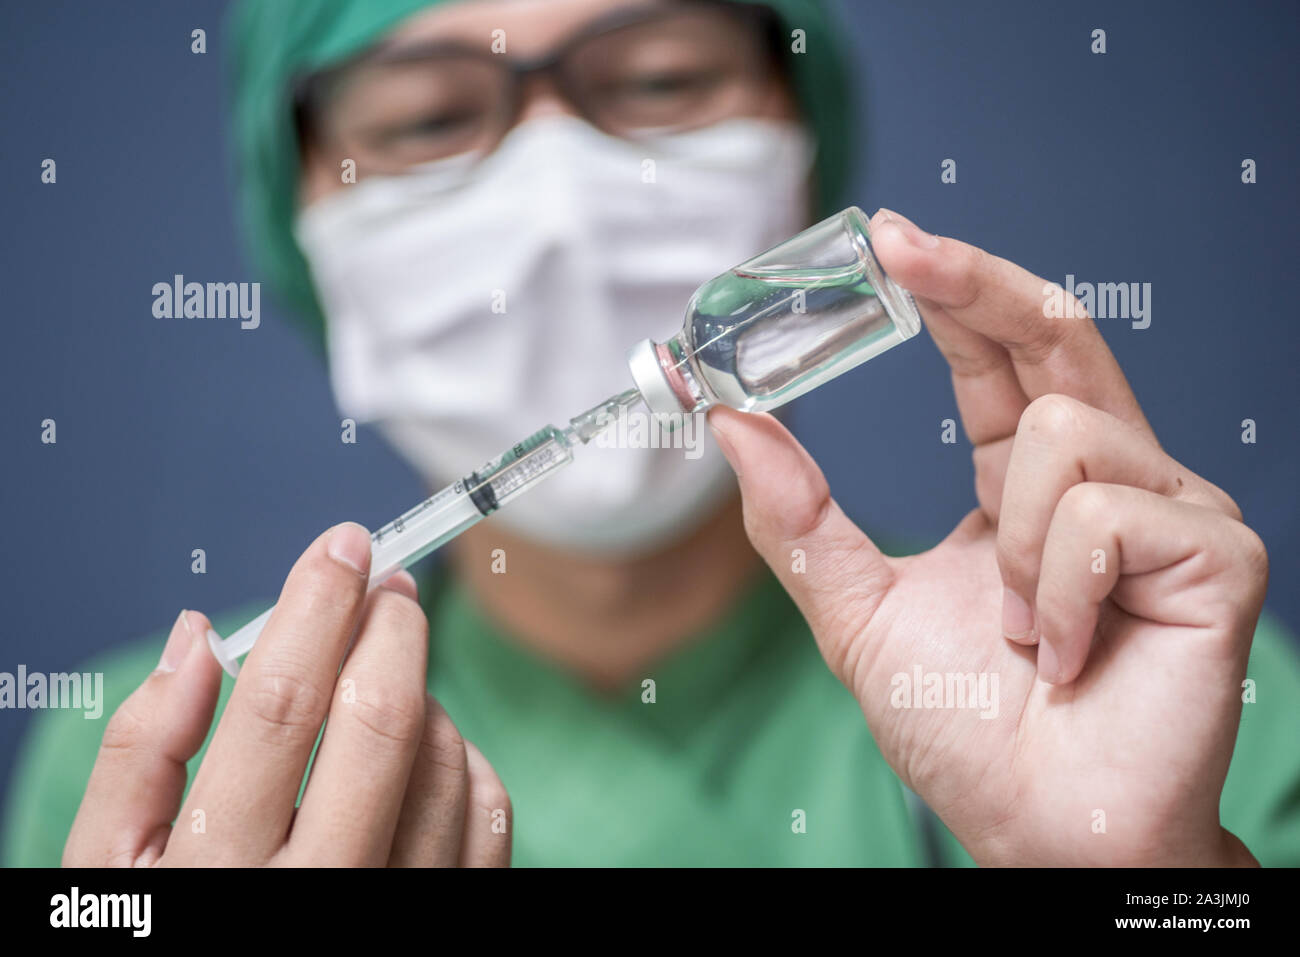 Doctor hold syringe prepare for injection,Epidural analgesia,Epidural nerve block, spinal block,Health care concept. , Stock Photo